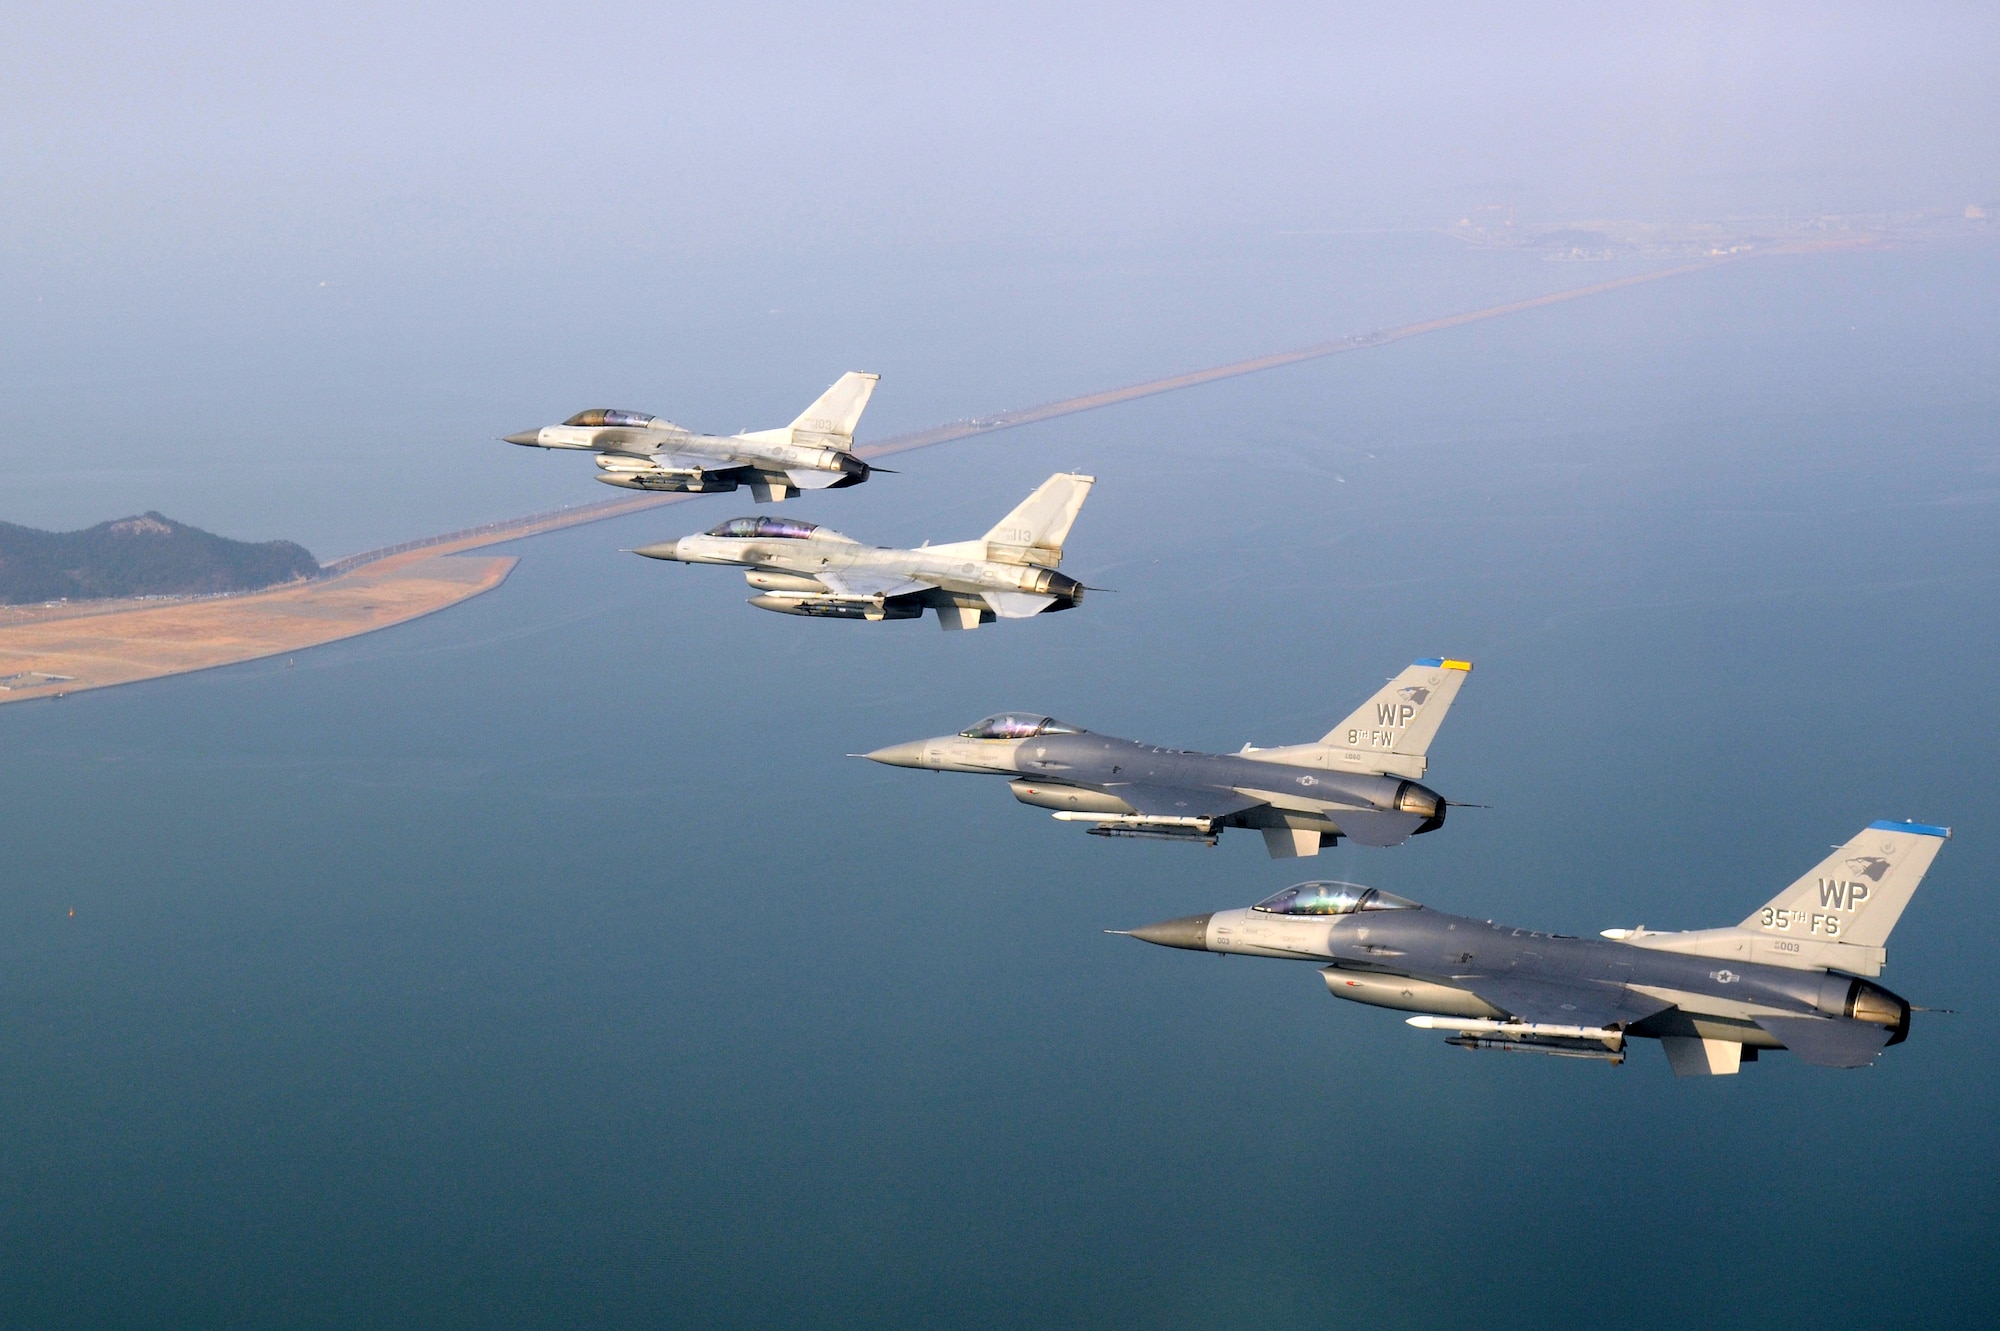 KUNSAN AIR BASE, Republic of Korea -- Four F-16 Fighting Falcons fly over the Saemangeum Seawall during a U.S. and Republic of Korea Air Force Coalition flight Nov. 10 in celebration of the 60th anniversary of the Korean War. (U.S. Air Force photo/Master Sgt. Jason Wilkerson)